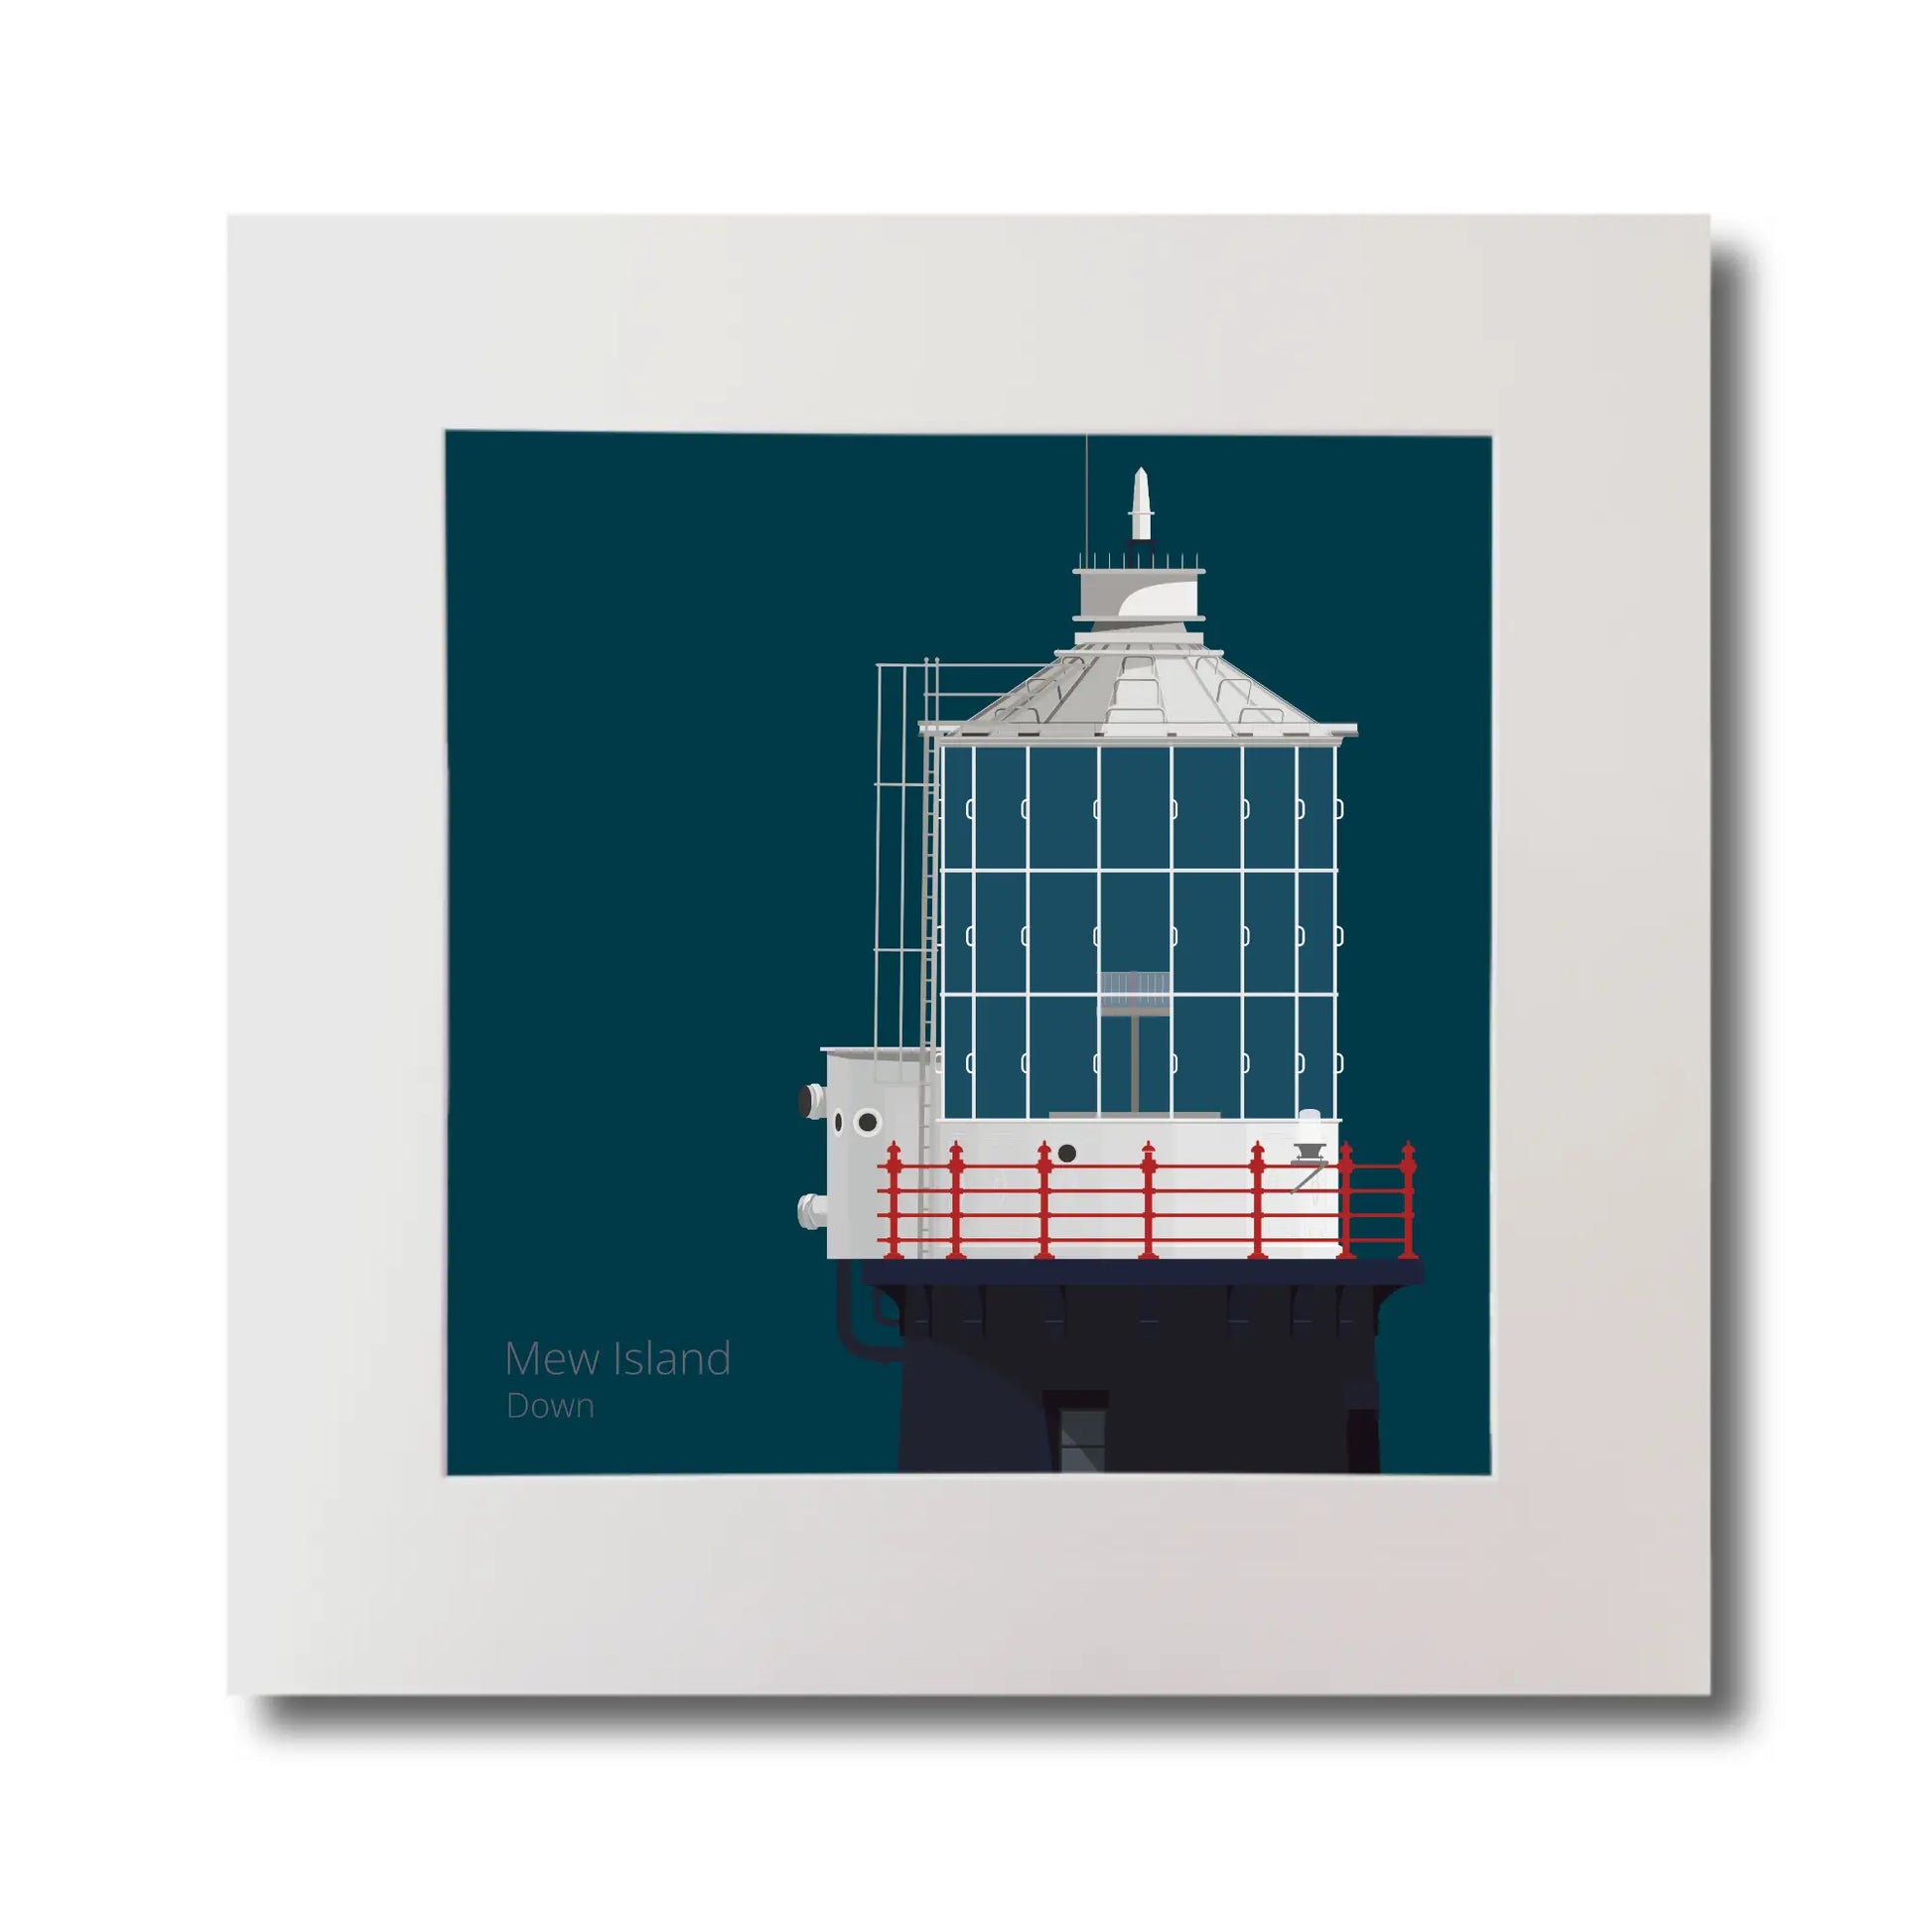 Illustration Mew Island lighthouse on a midnight blue background, mounted and measuring 30x30cm.